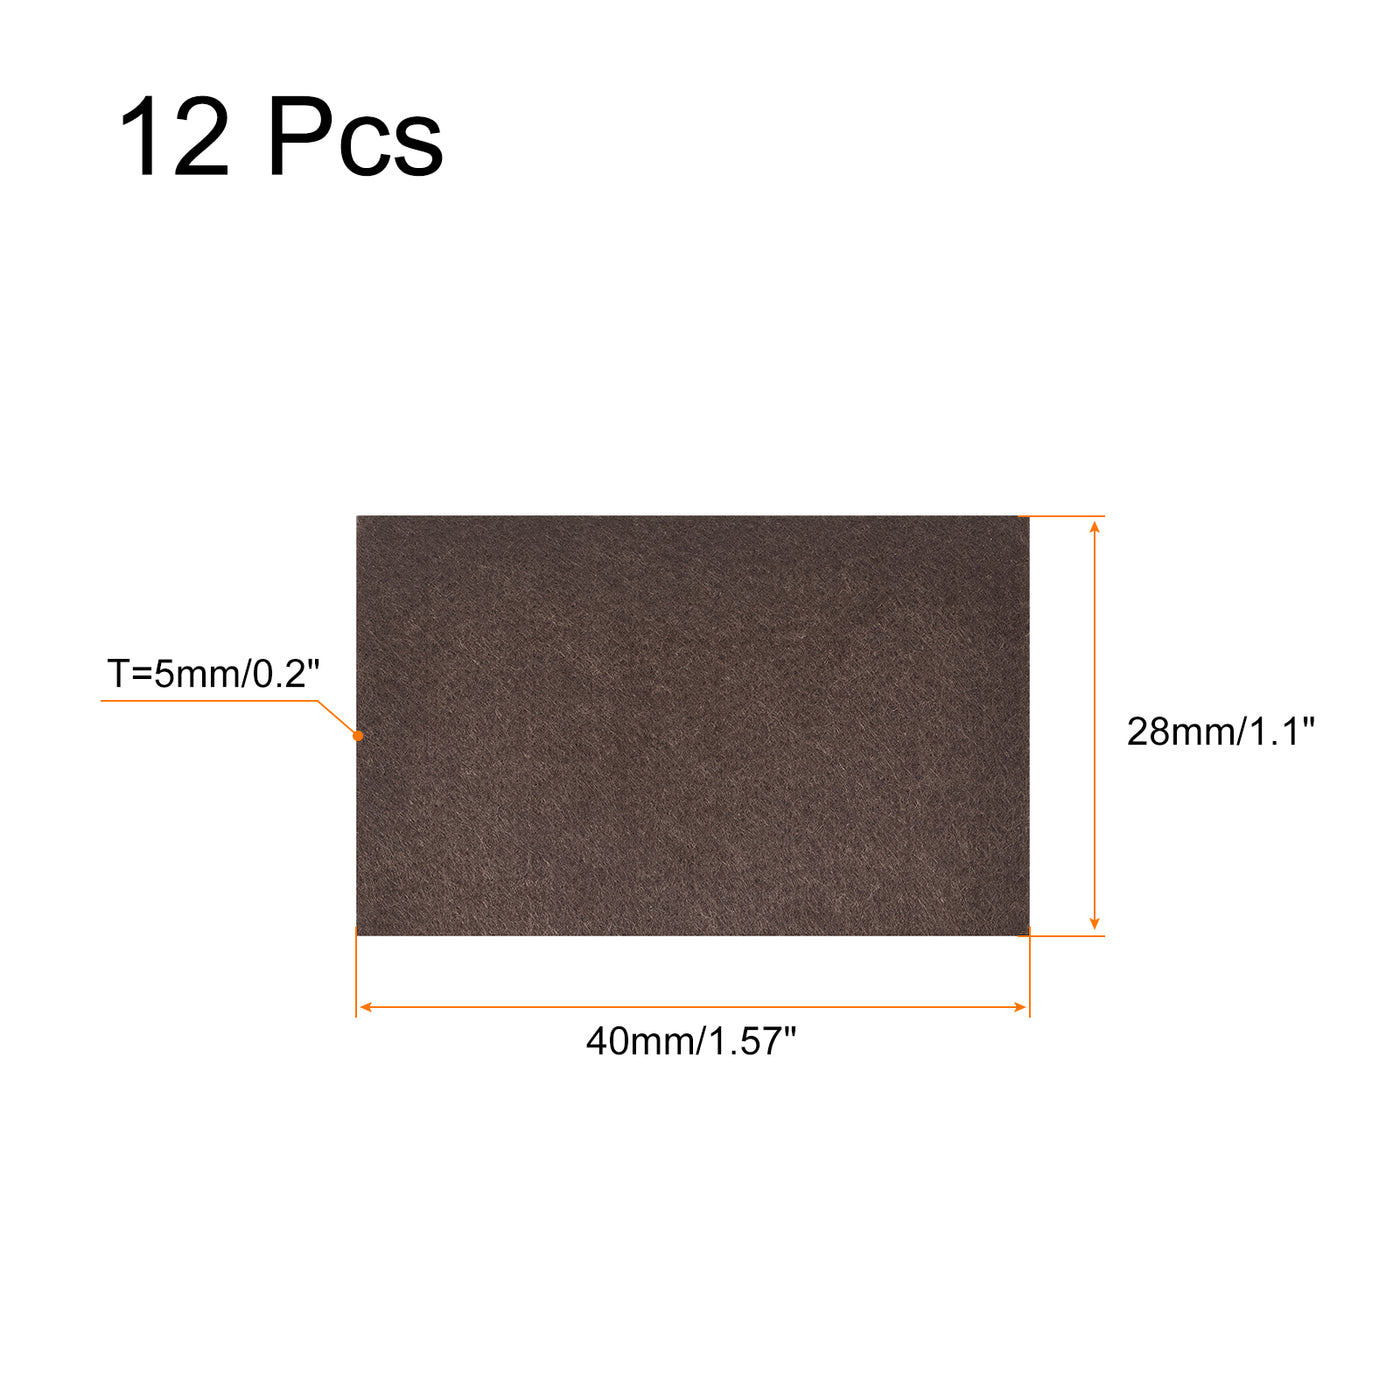 uxcell Uxcell Felt Furniture Pads, 40mm x 28mm Self Adhesive Square Floor Protectors for Furniture Legs Hardwood Floor, Brown 12Pcs